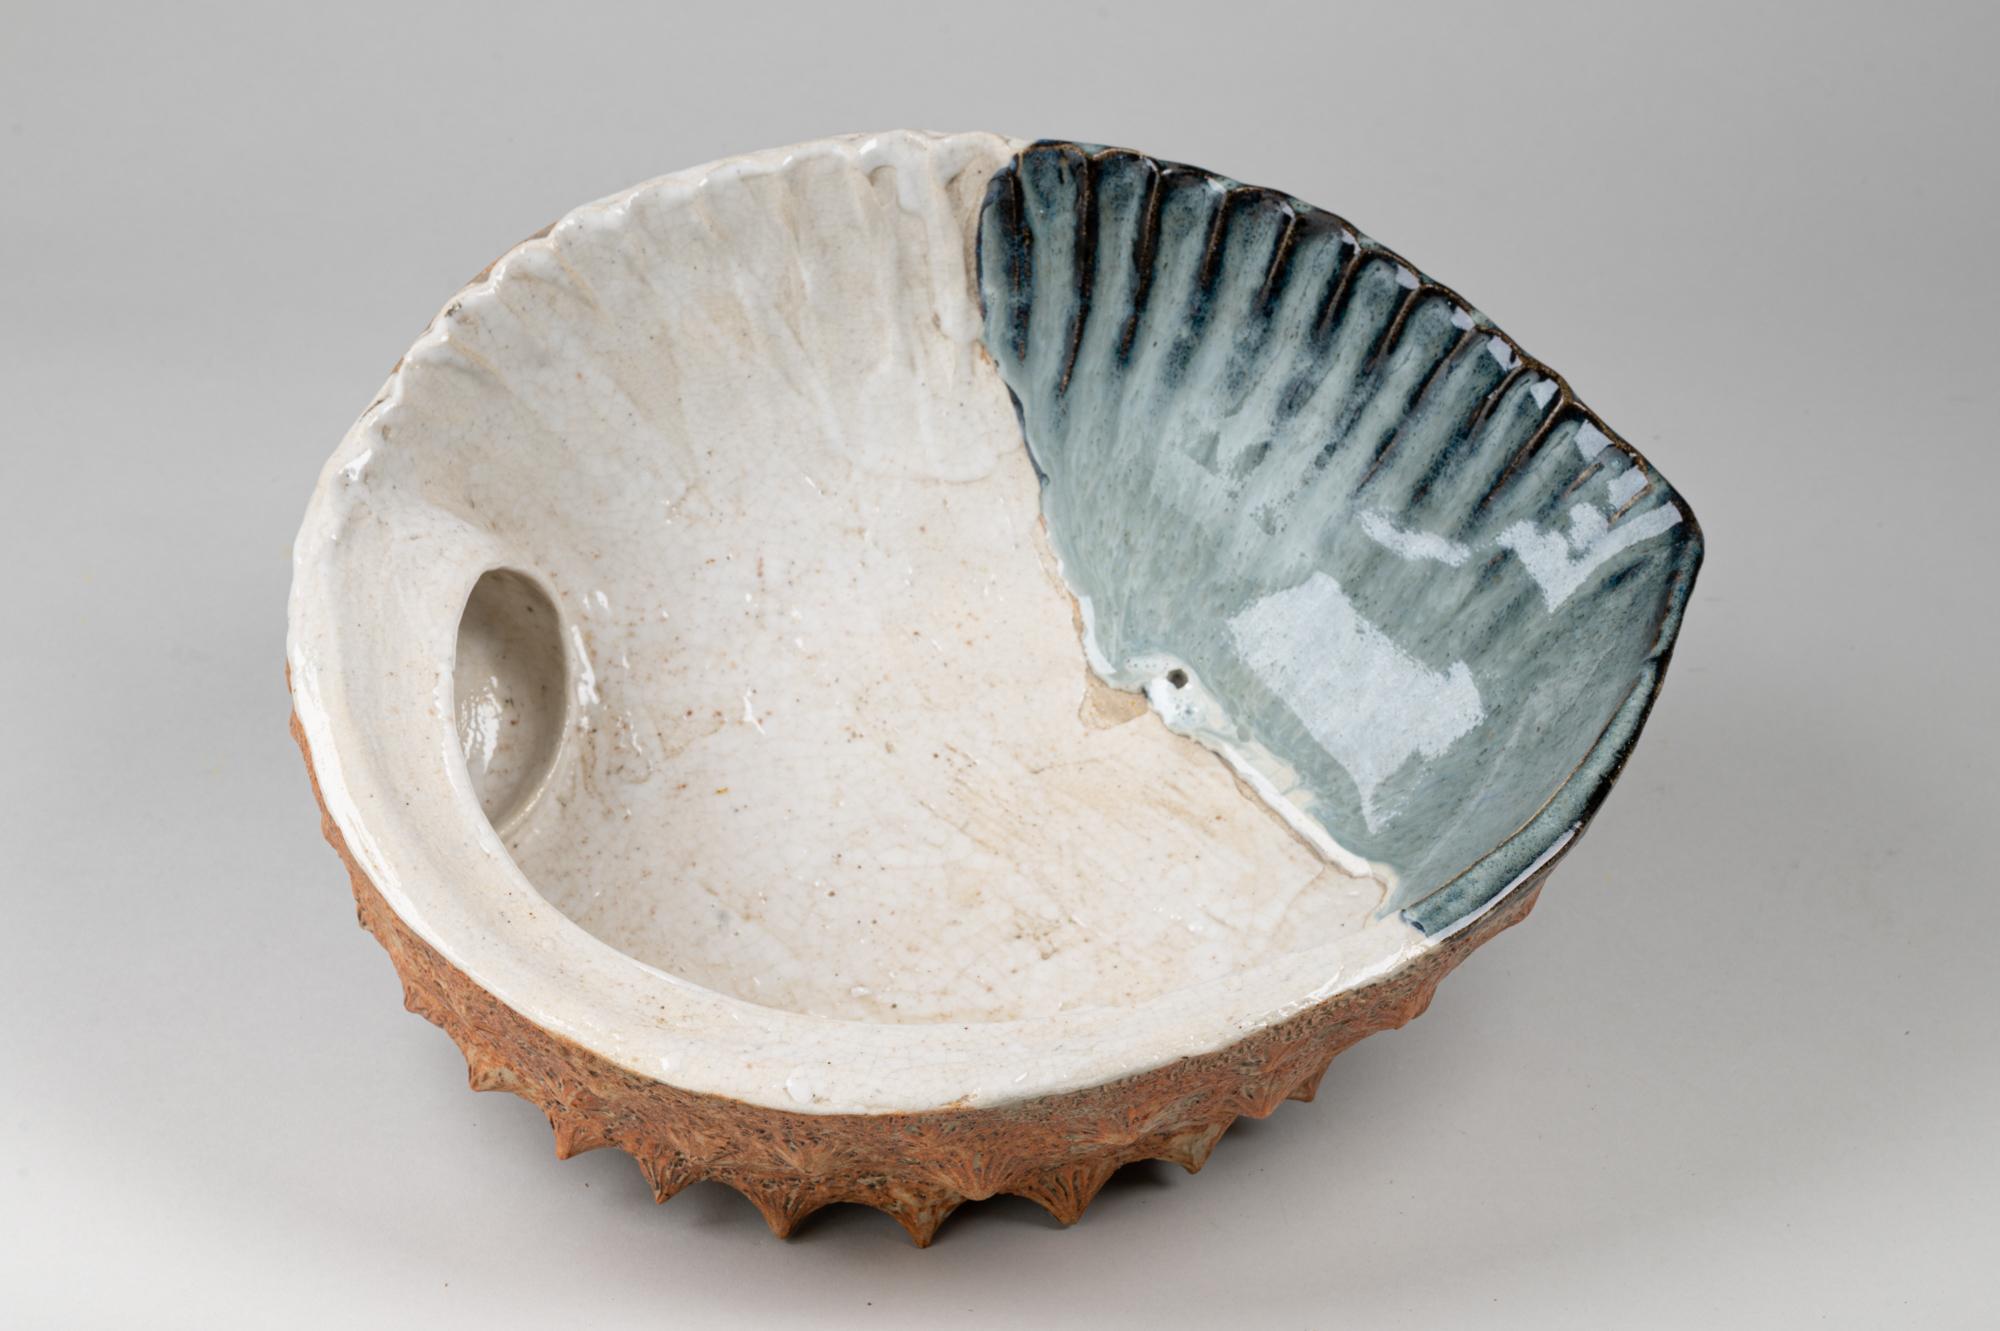 Meiji Period abalone shell ceramic basin, Meiji period (1868-1912) ceramic bowl in the shape of an abalone shell, with wonderful realistic details and whimsical execution. Gloss glaze on the inside and matte glaze on the outside. Outside of the